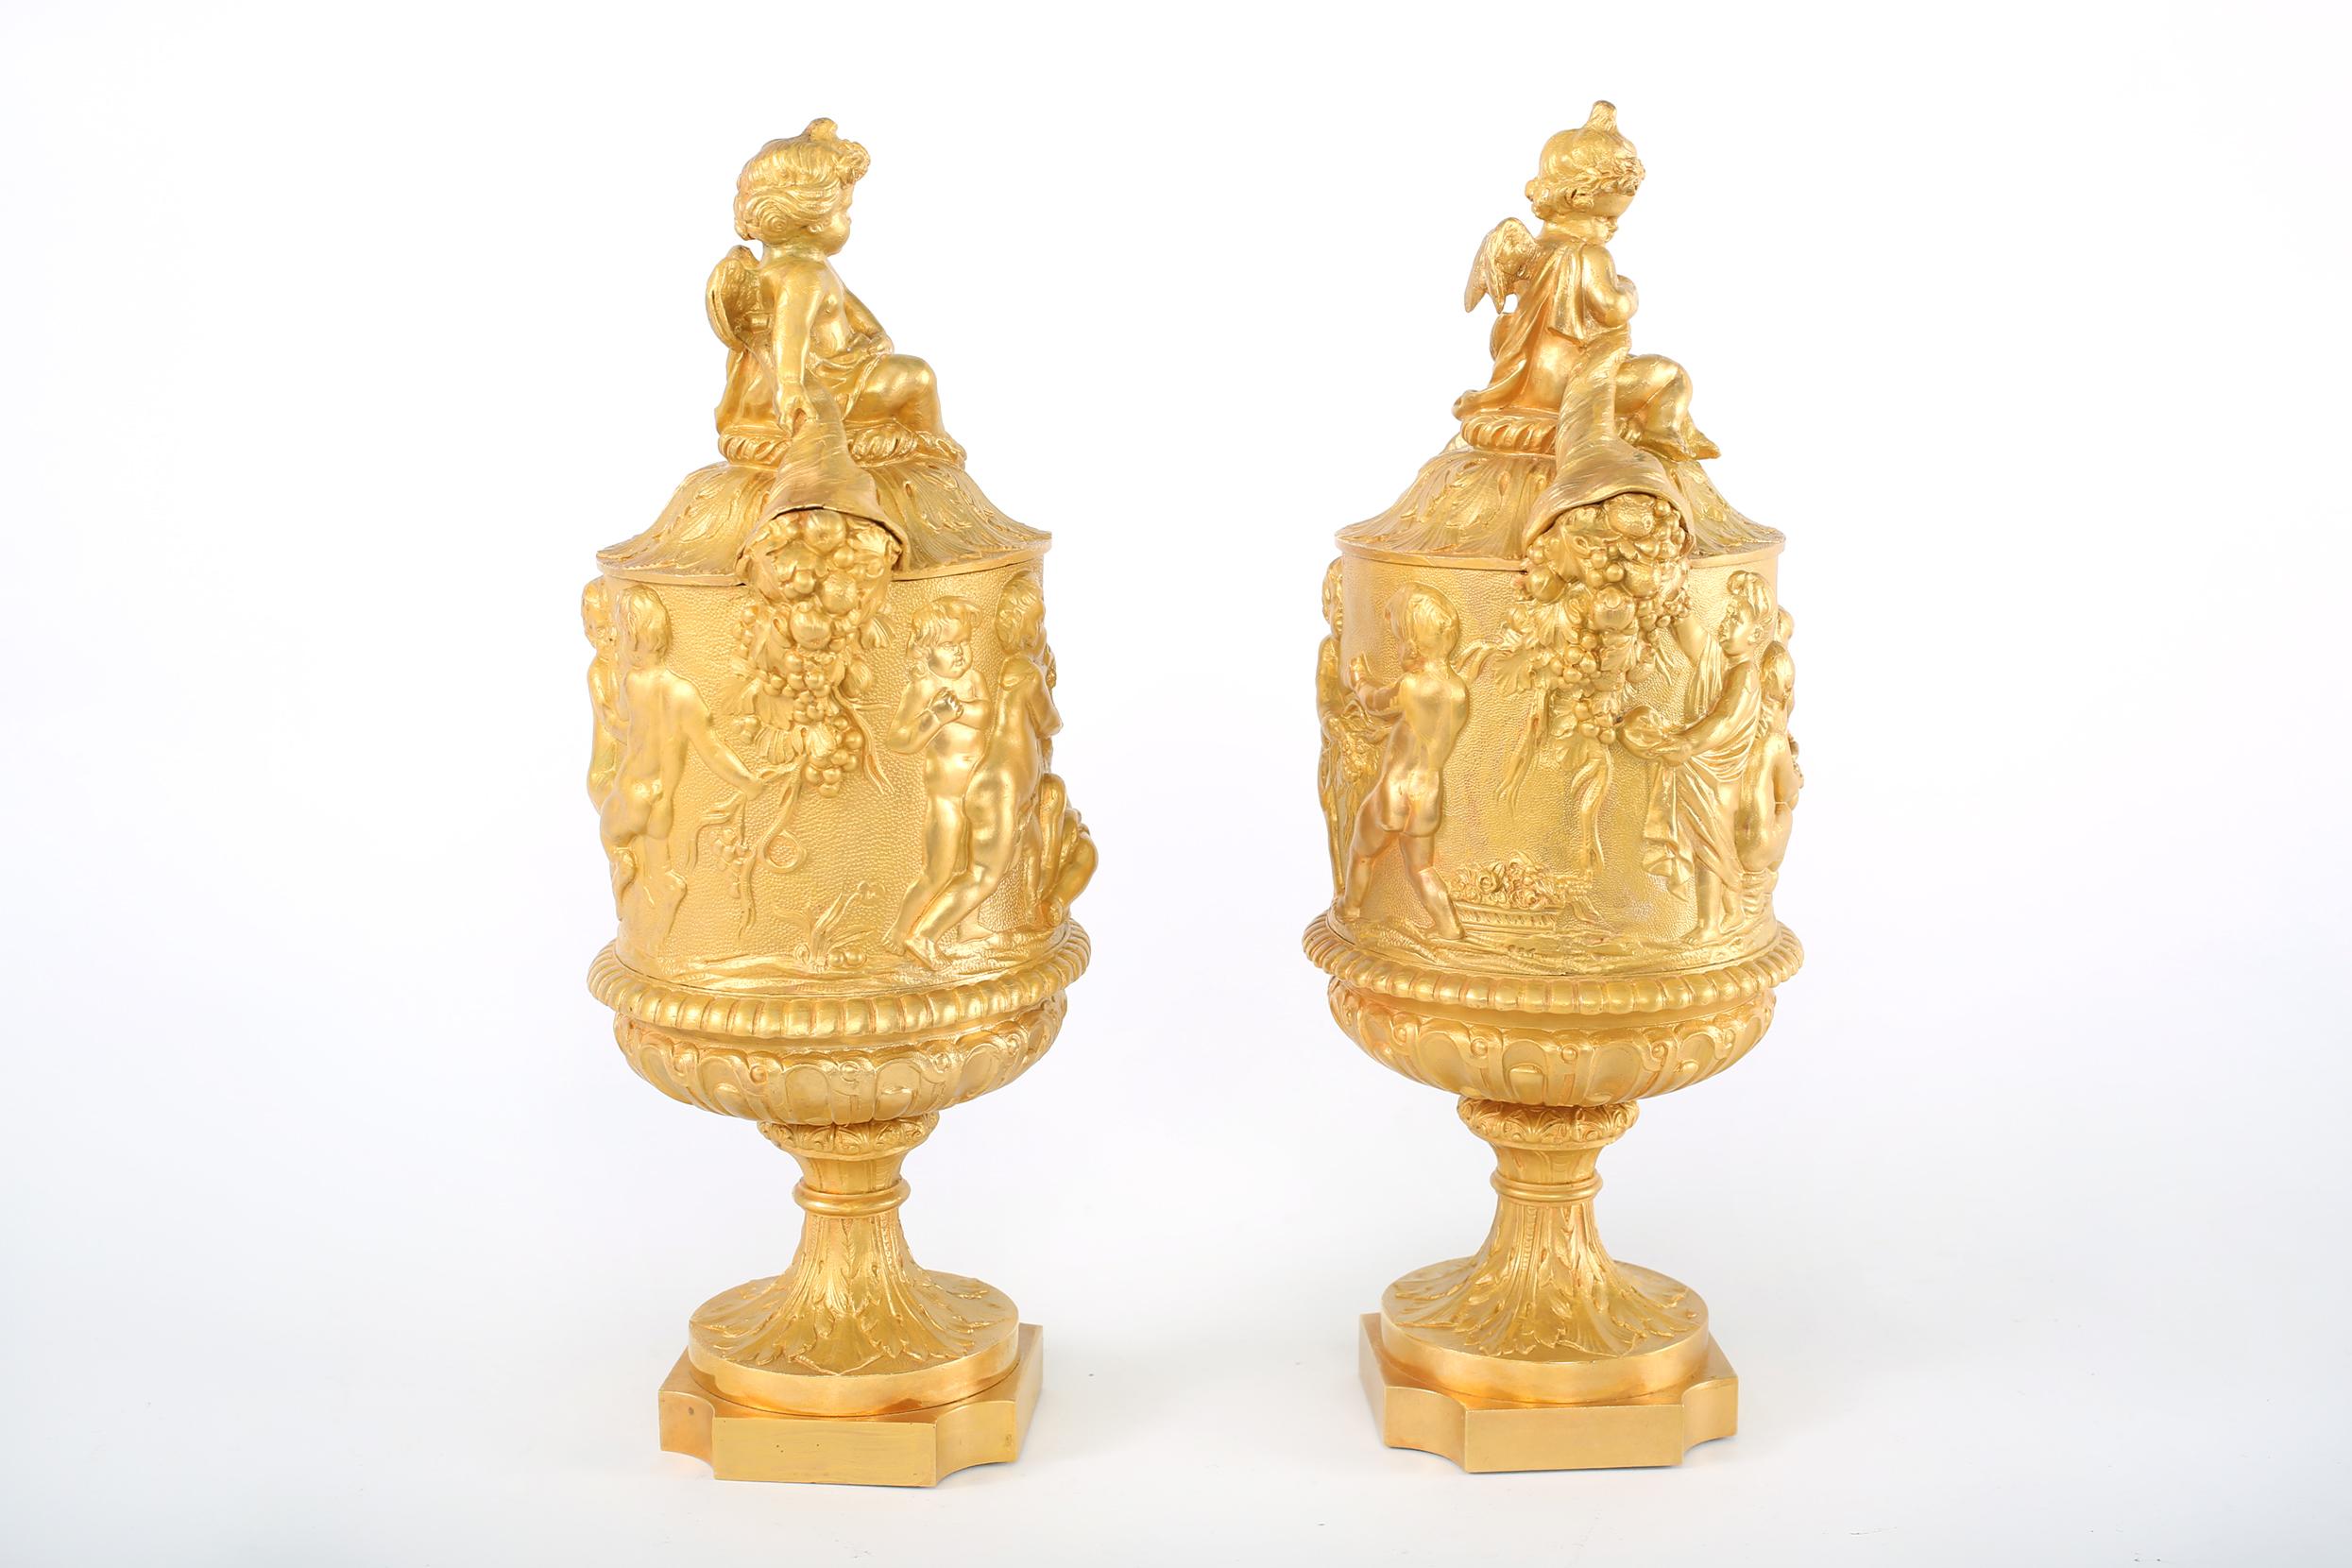 Pair continental gilt bronze covered decorative Urns with exterior design details. Each urn is in great condition. Minor wear consistent with age / use. Each one stands about 15-1/4 inches x 7 inches x 5-3/4 inches.